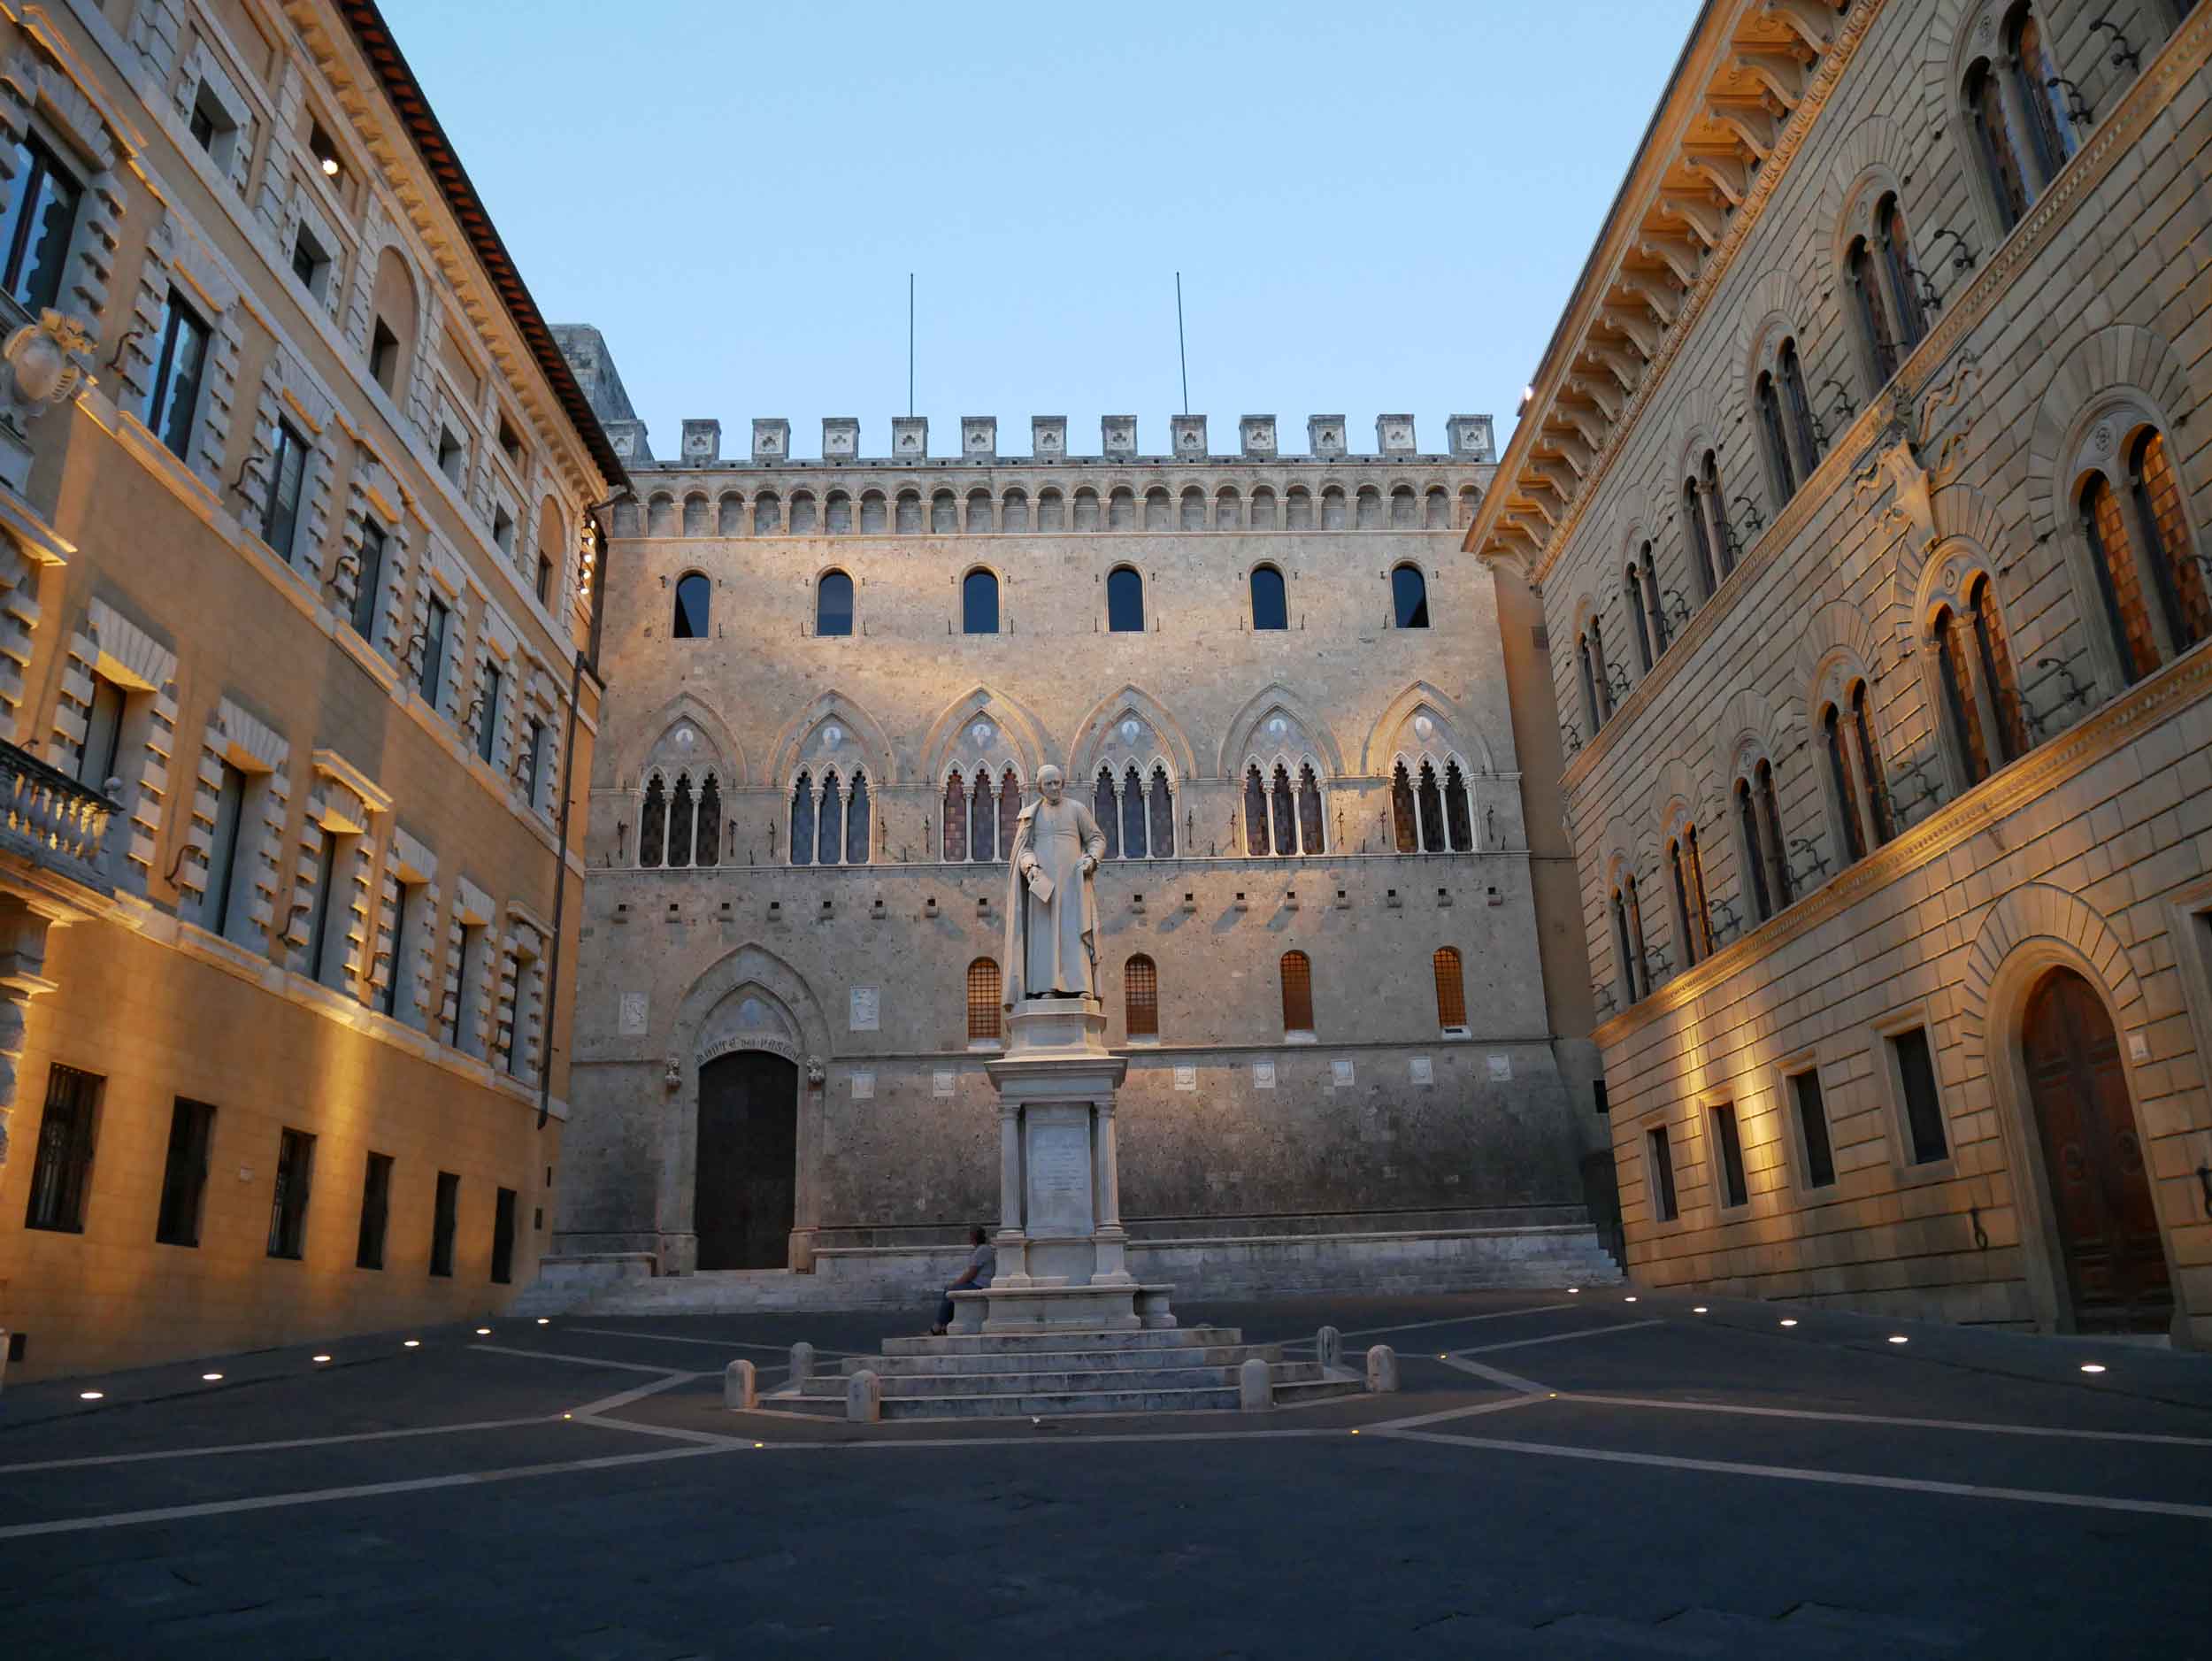  As dusk began to settle, pretty Siena came to life across it's little squares and many statues.&nbsp; 